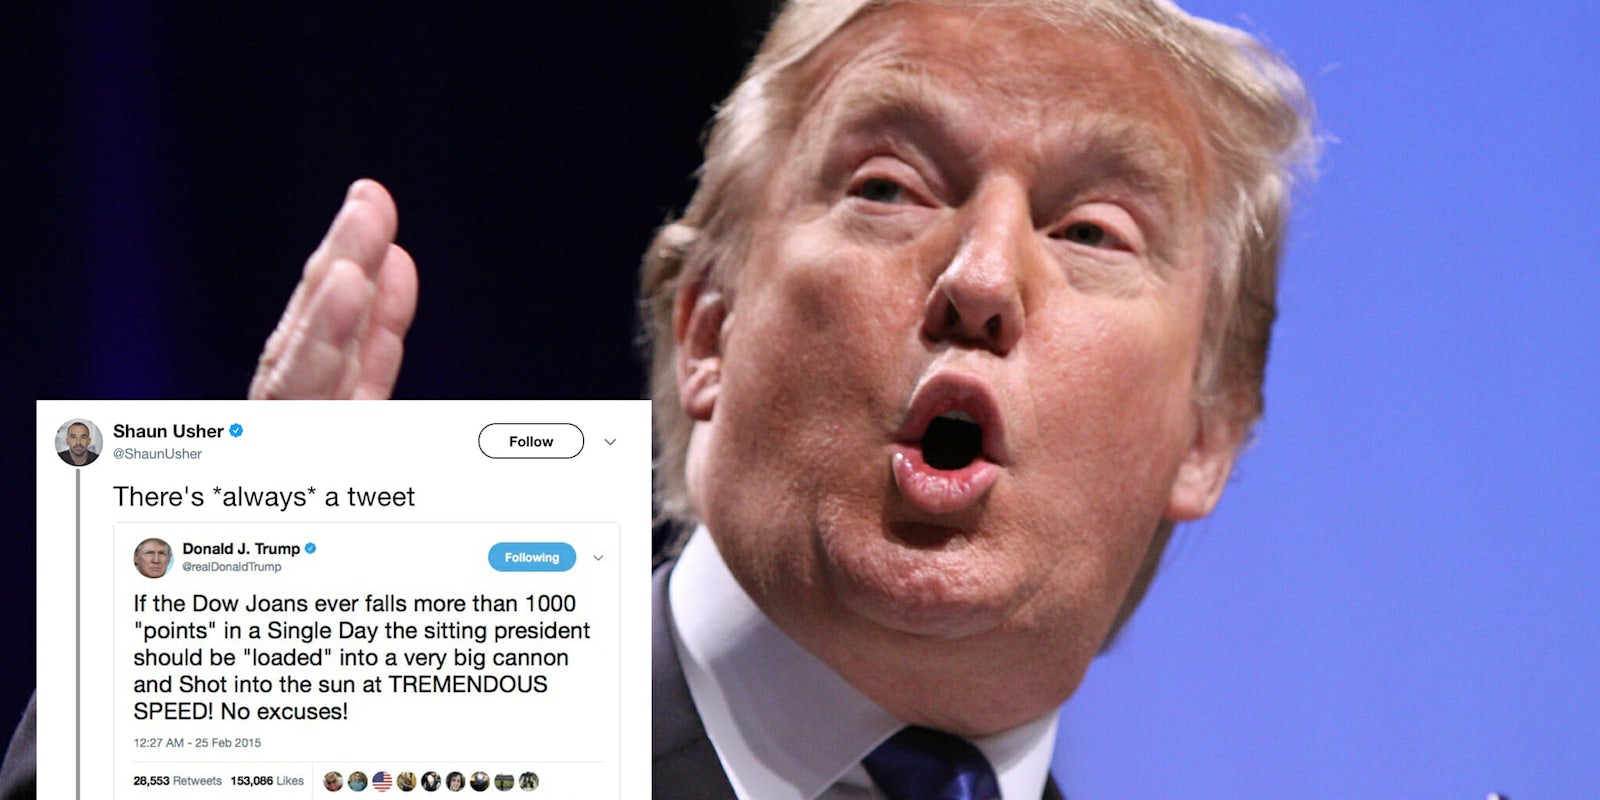 A Trump tweet about the 'Dow Joans' went viral Monday—but it's fake.